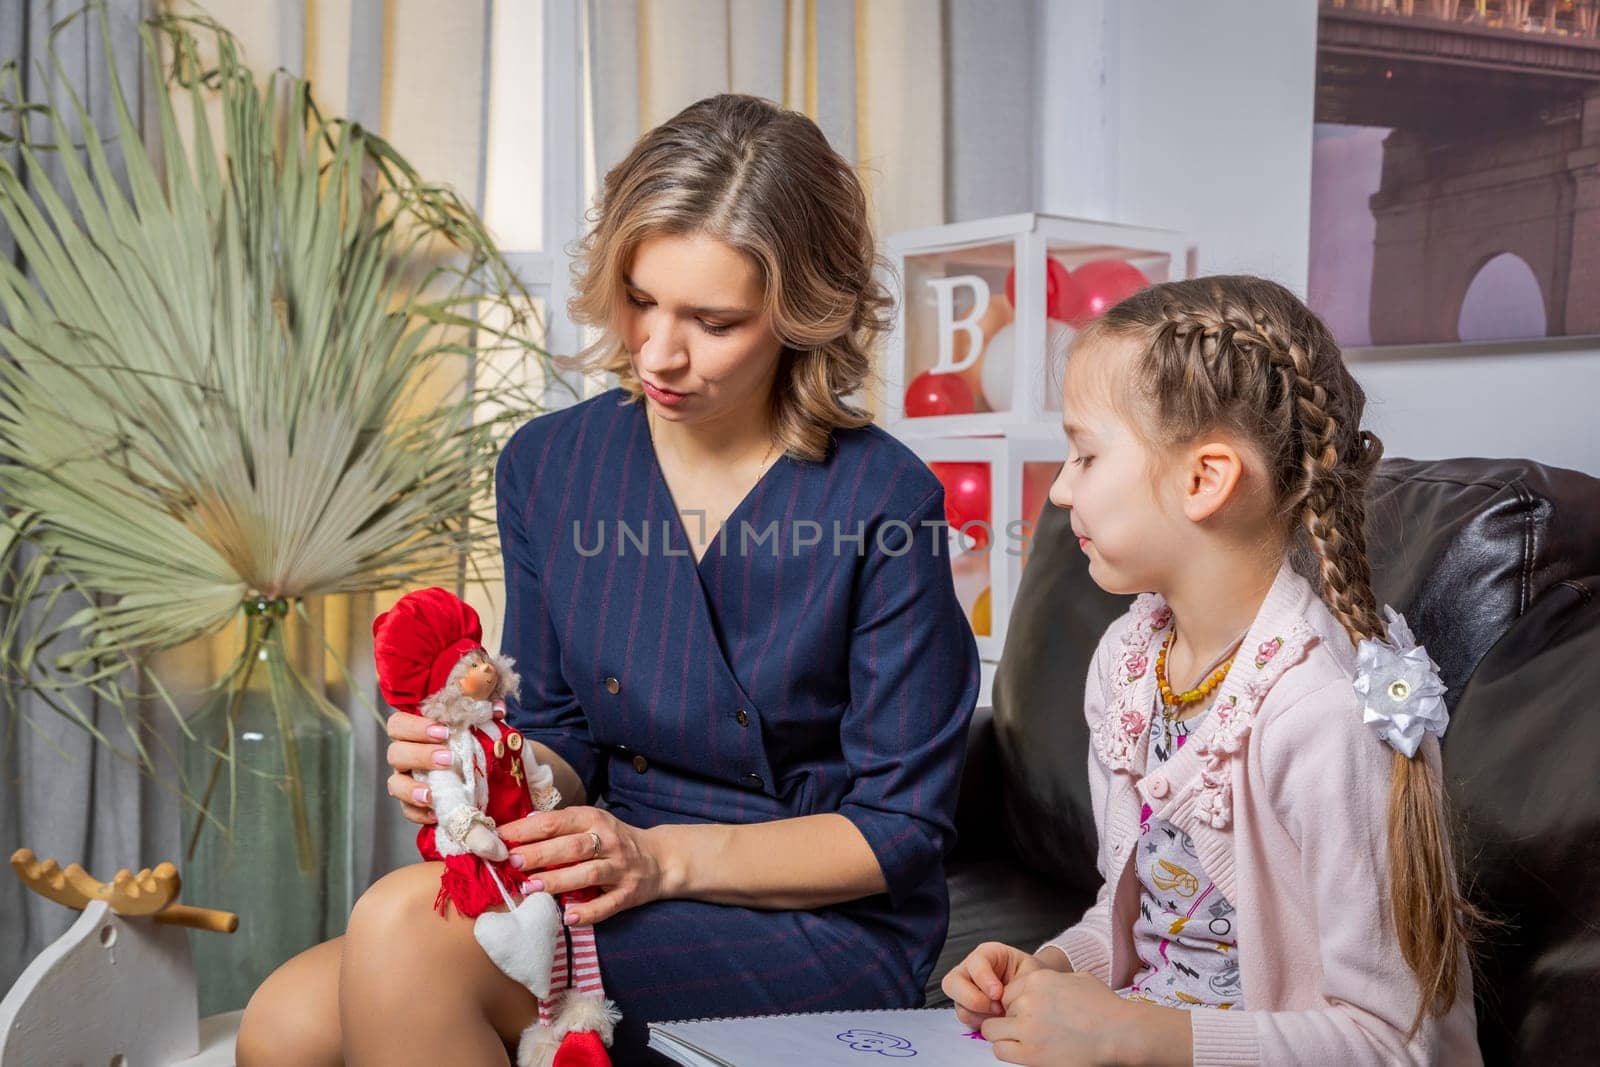 The girl psychologist plays a puppet character game with the child